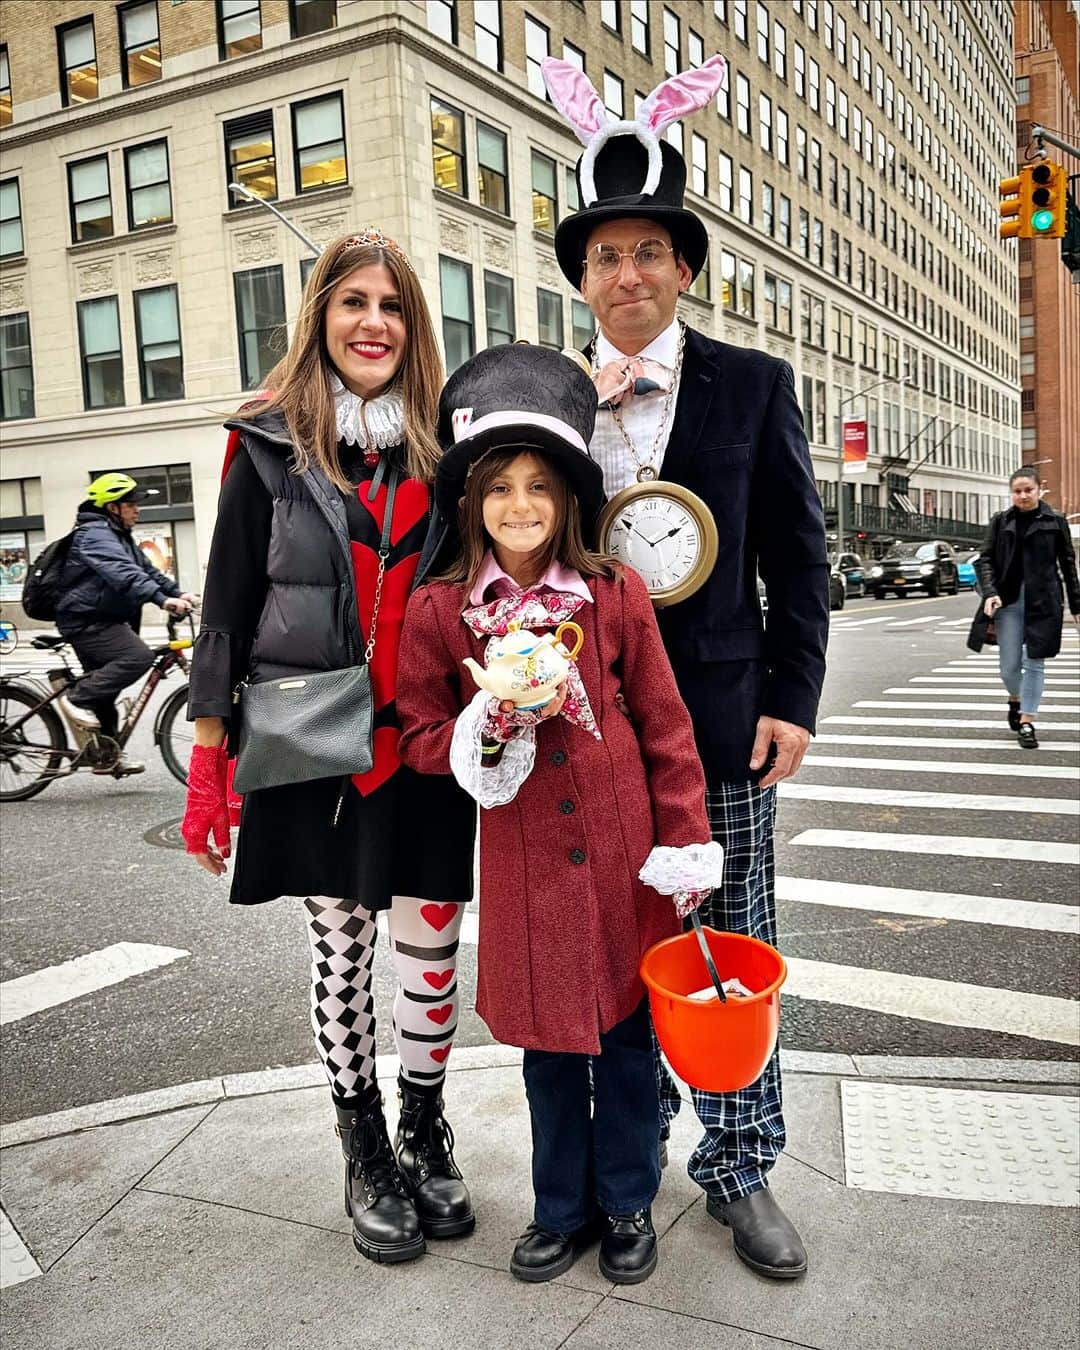 Ilana Wilesのインスタグラム：「Harlow wanted to be the Mad Hatter so like usual, Mike and I built our costumes around that. I was the Queen of Hearts and Mike was the white rabbit. Harlow made her hat herself by hot gluing a tea set to the top and cards on the side. I reinforced the inside with cardboard so it could hold the weight without buckling. There is no photo that does it justice. Mike was in charge of his own costume. He always acts like he’s not on top of it and then surprises us by knocking it out of the park at the last second. I wish I didn’t have my jacket on in the first photo but it was cold! If you’re wondering about Mazzy, she was a ghostbuster with a bunch of friends at a party on Saturday and spent tonight watching scary movies with a friend at home and answering the door for trick or treaters in our building. We missed her though!!!」